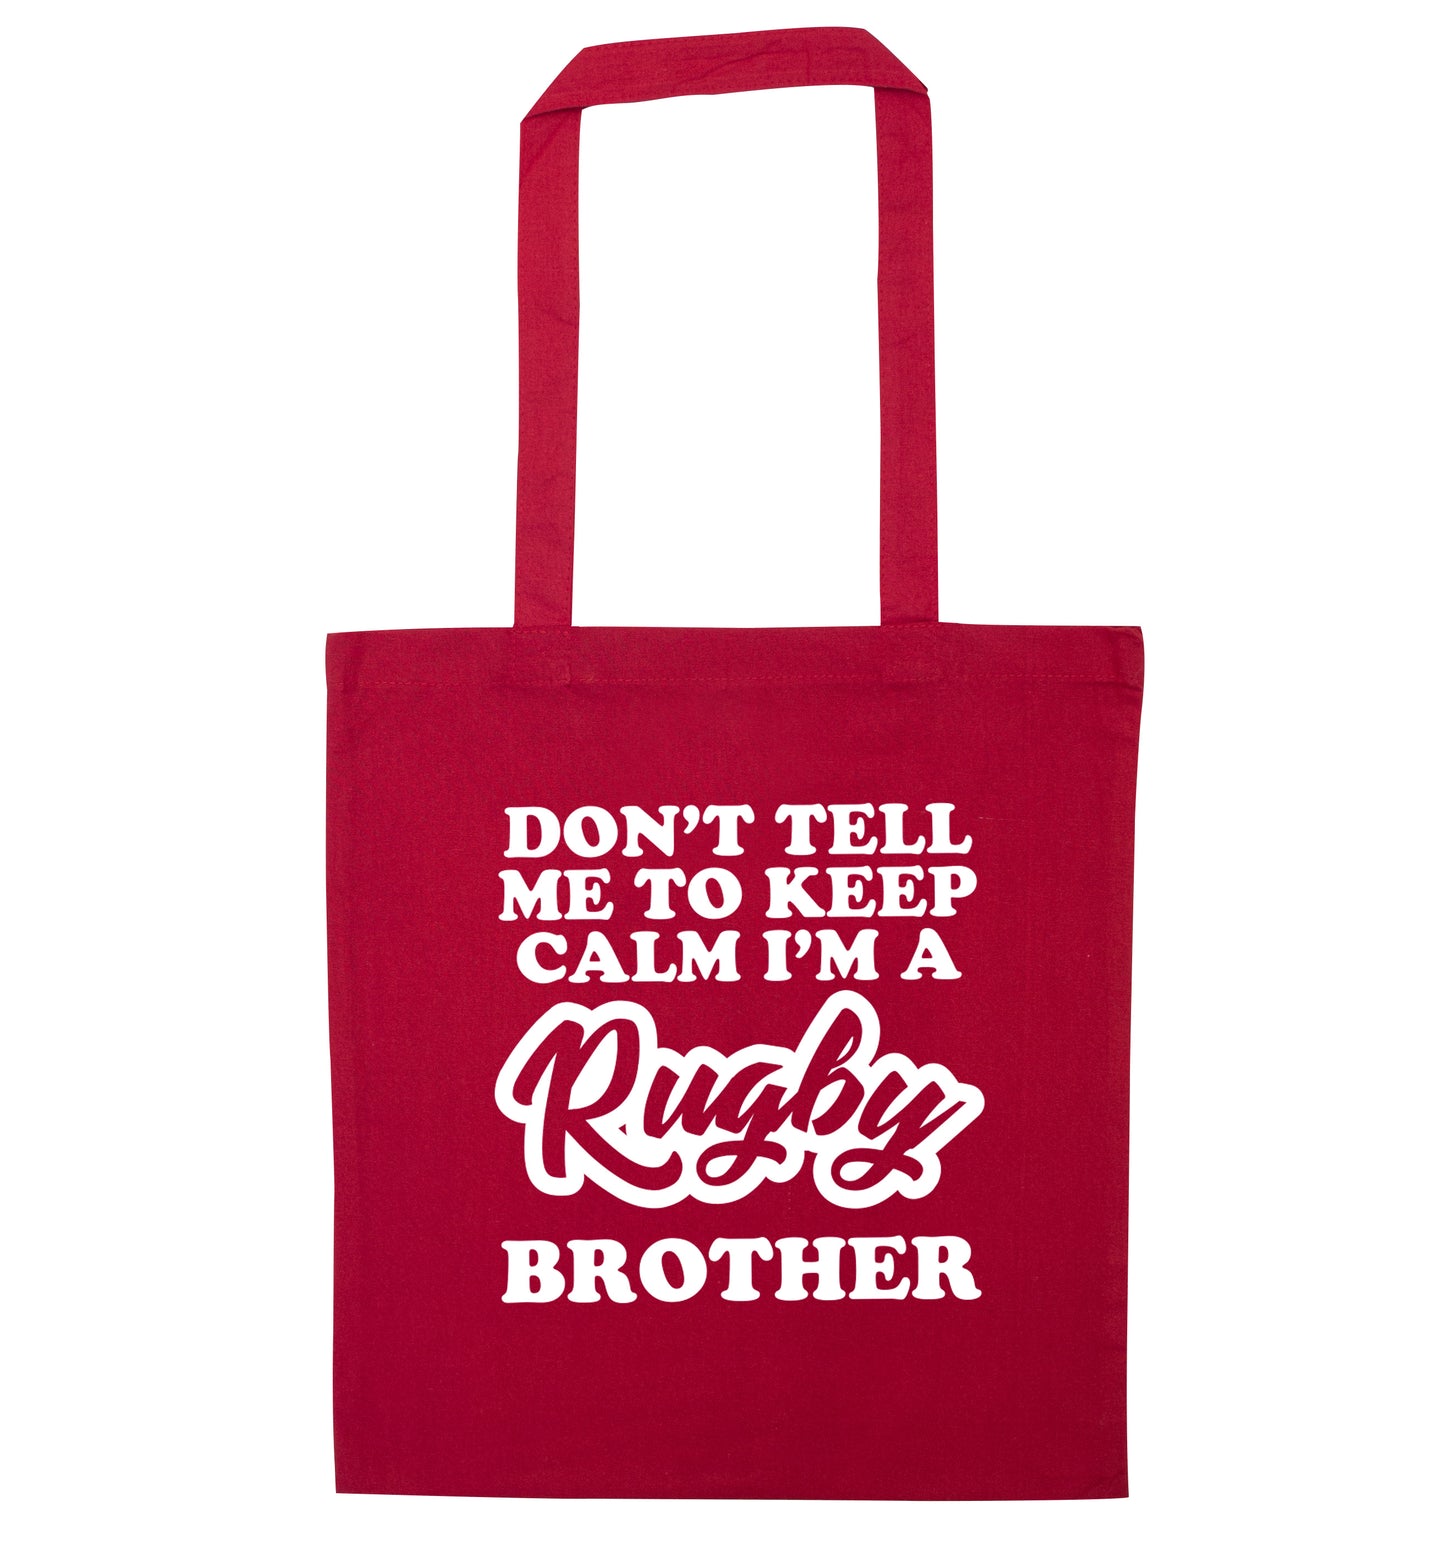 Don't tell me keep calm I'm a rugby brother red tote bag